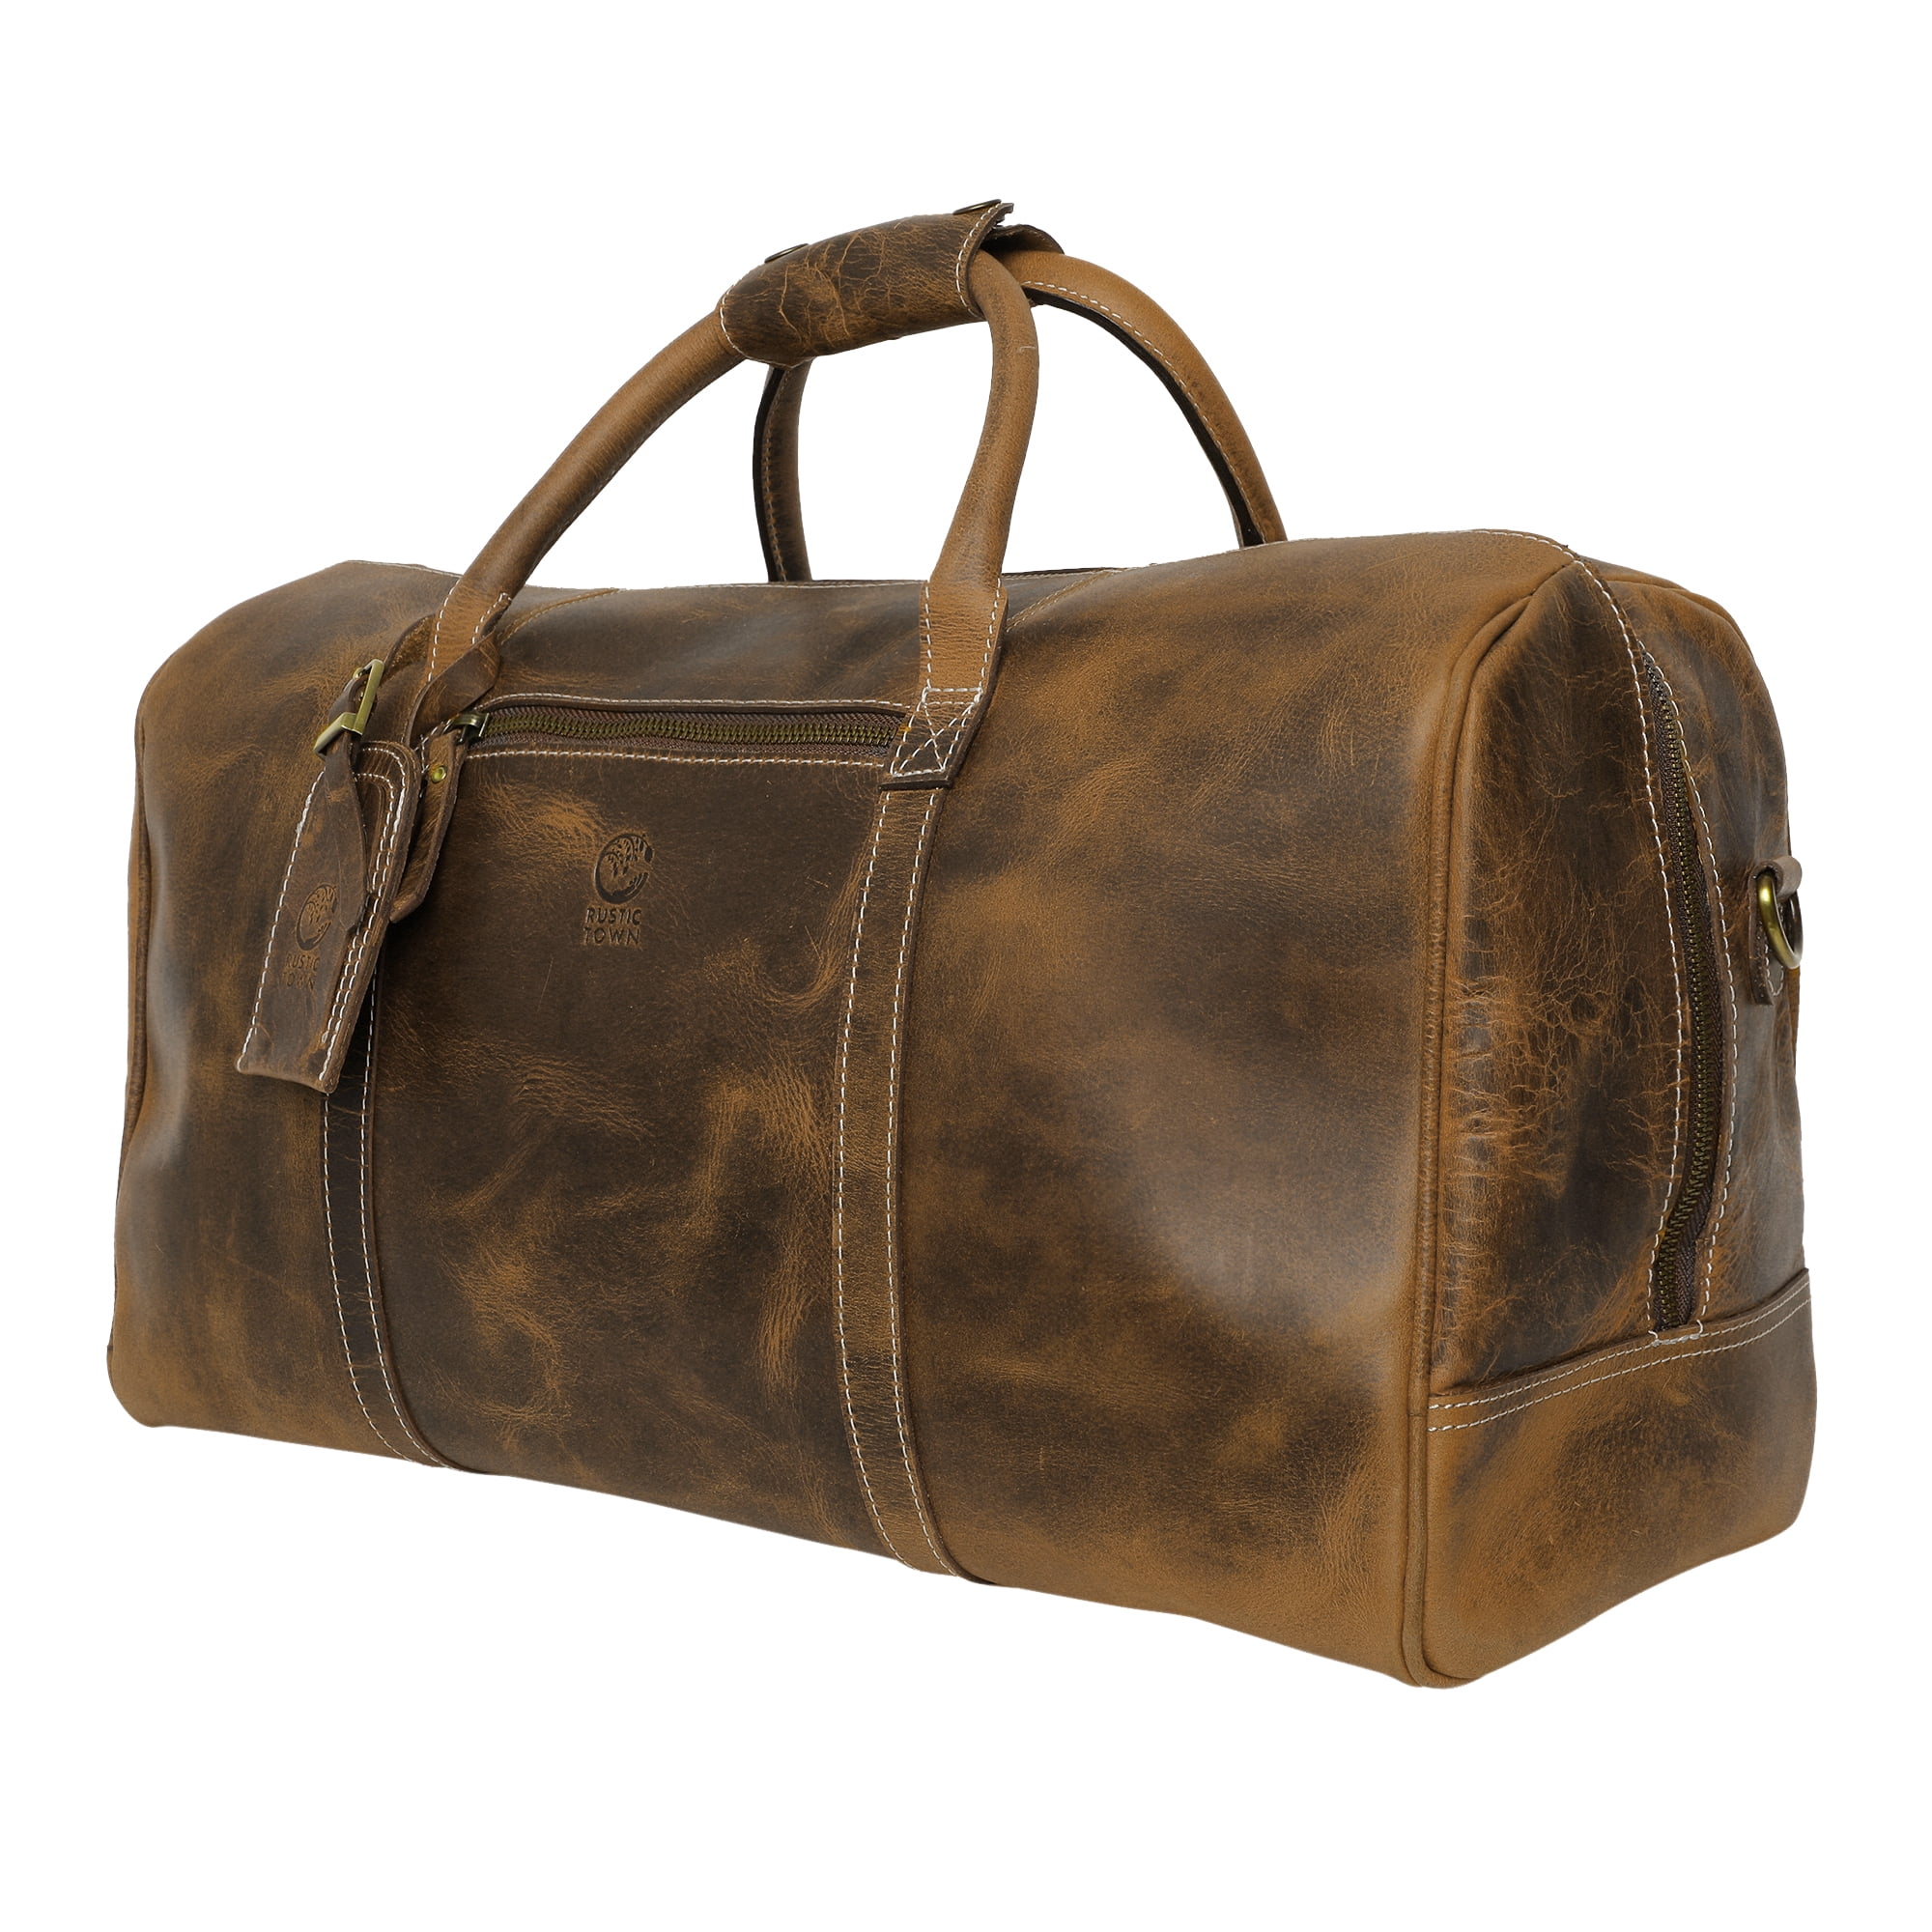 vintage style travel bags